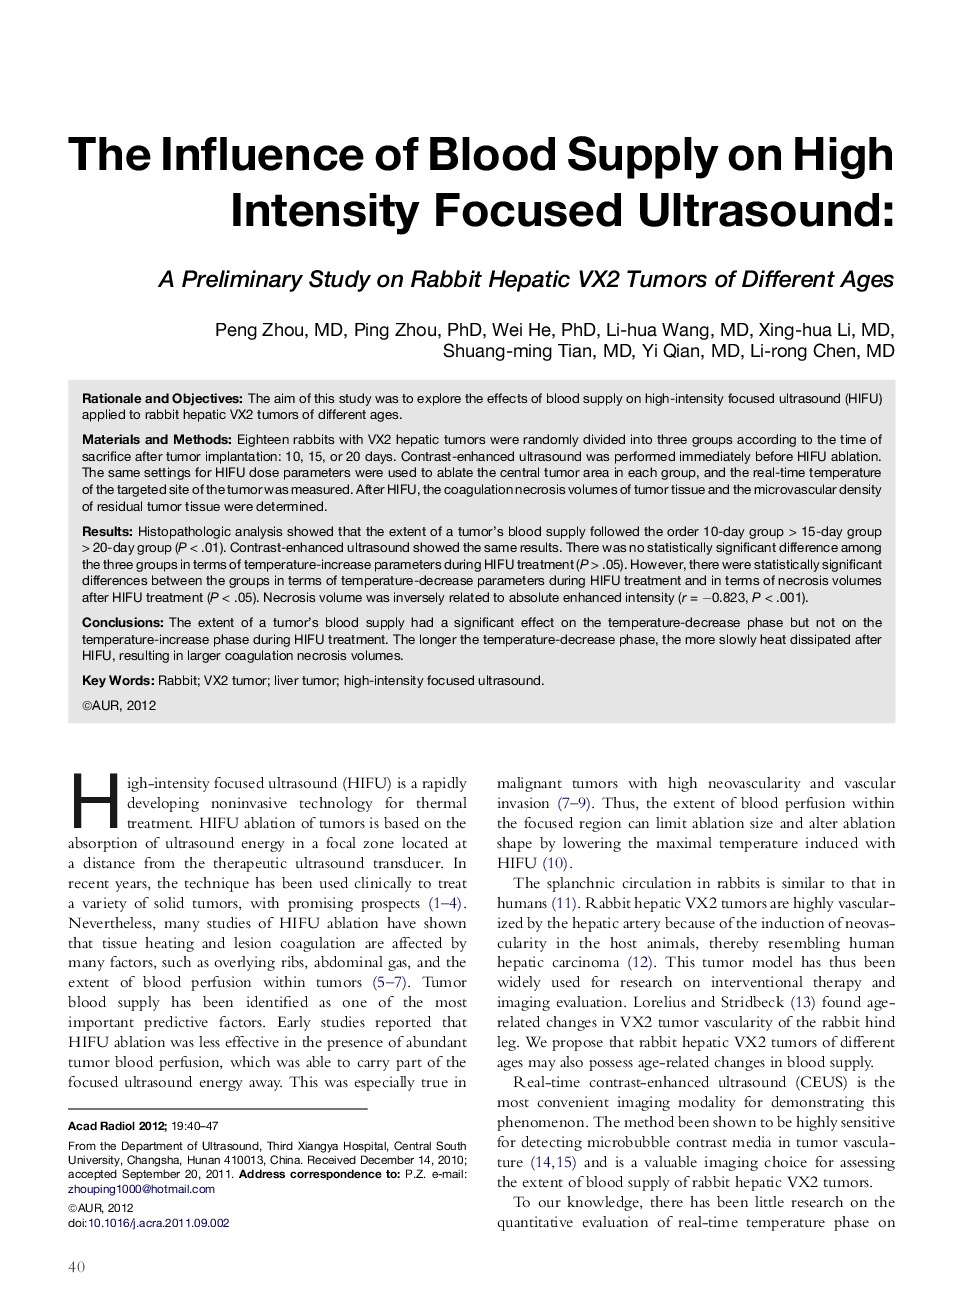 The Influence of Blood Supply on High Intensity Focused Ultrasound